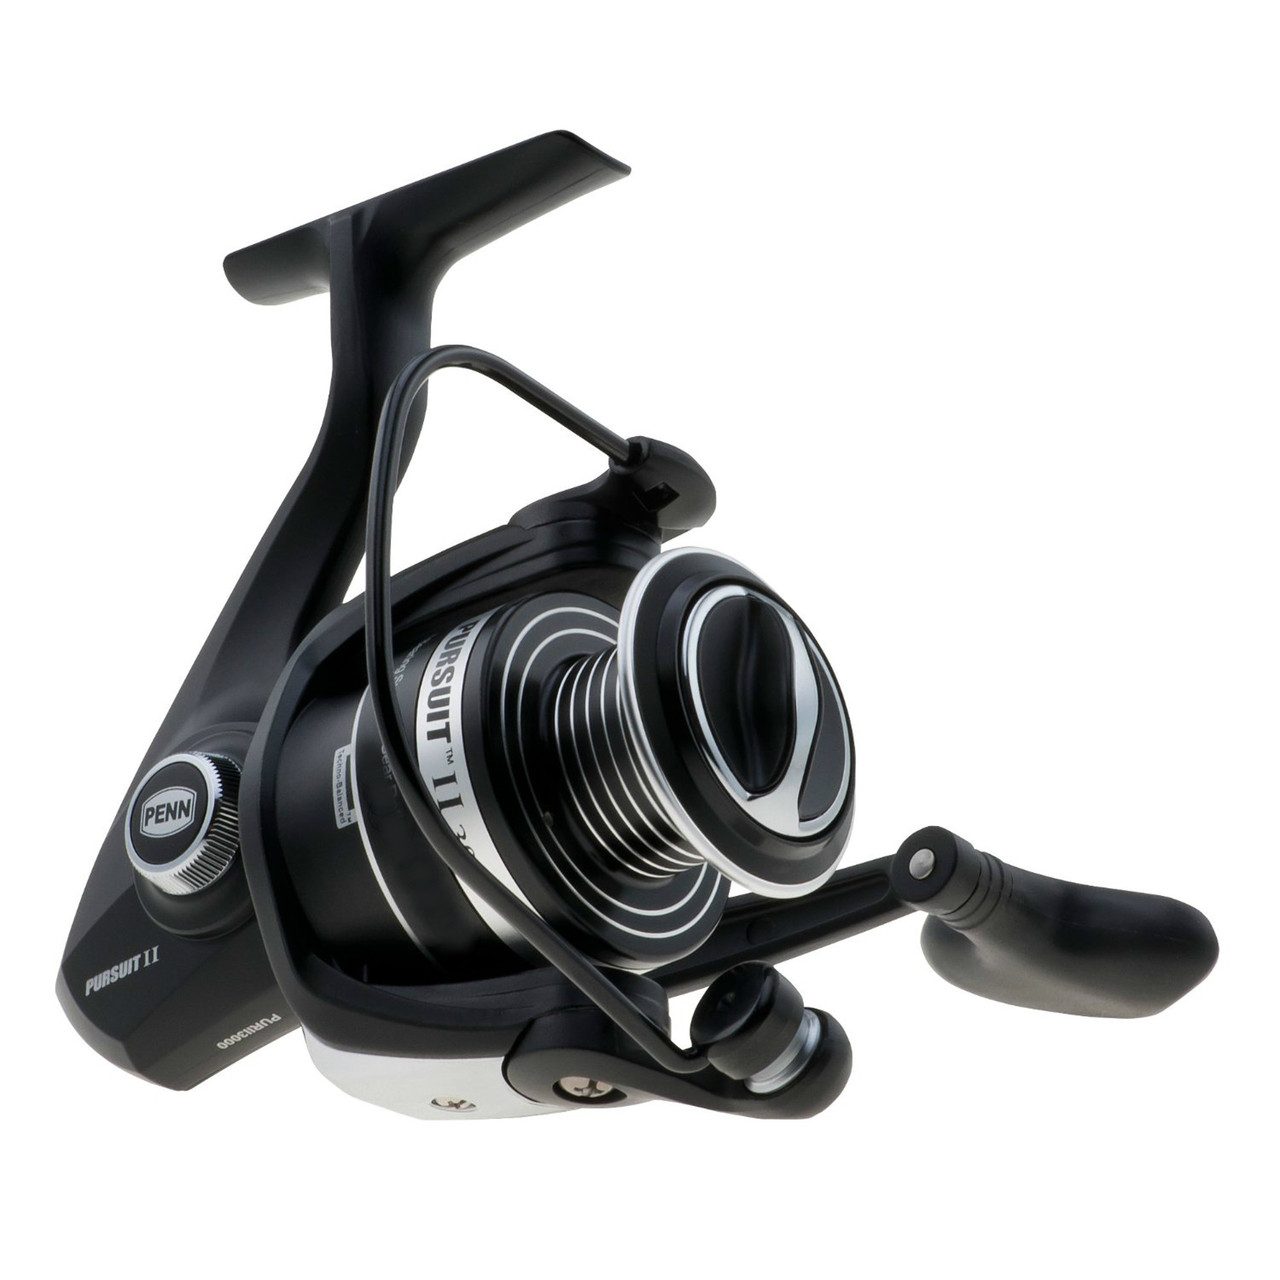 https://cdn10.bigcommerce.com/s-hudw0p8/products/37005/images/5122/1292958-penn-pursuit-ii-4000-5000-8000-spinning-reel-1__84908.1530490294.1280.1280.jpg?c=2